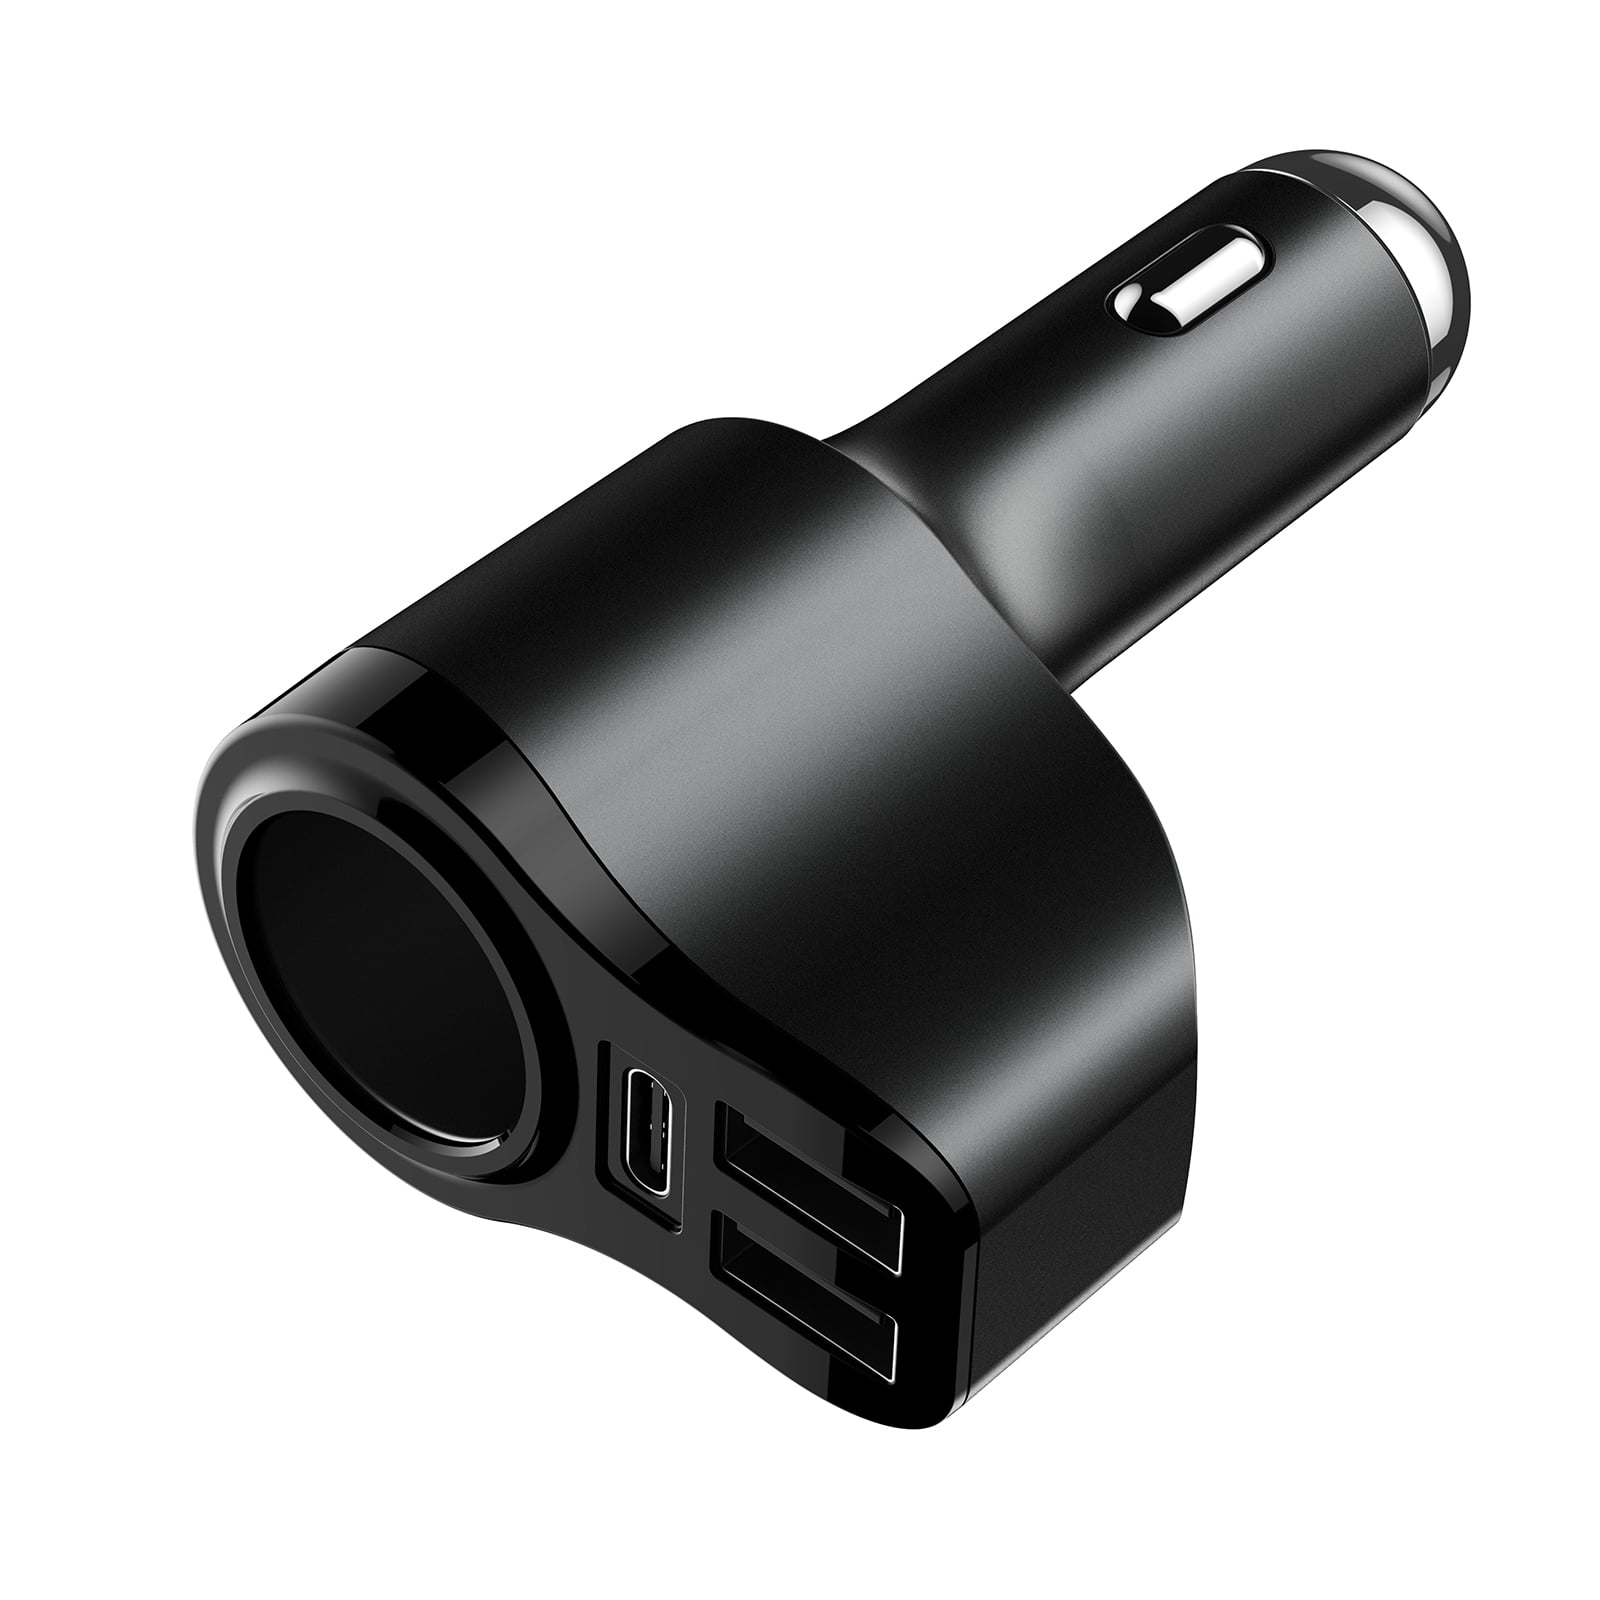 two usb car charger